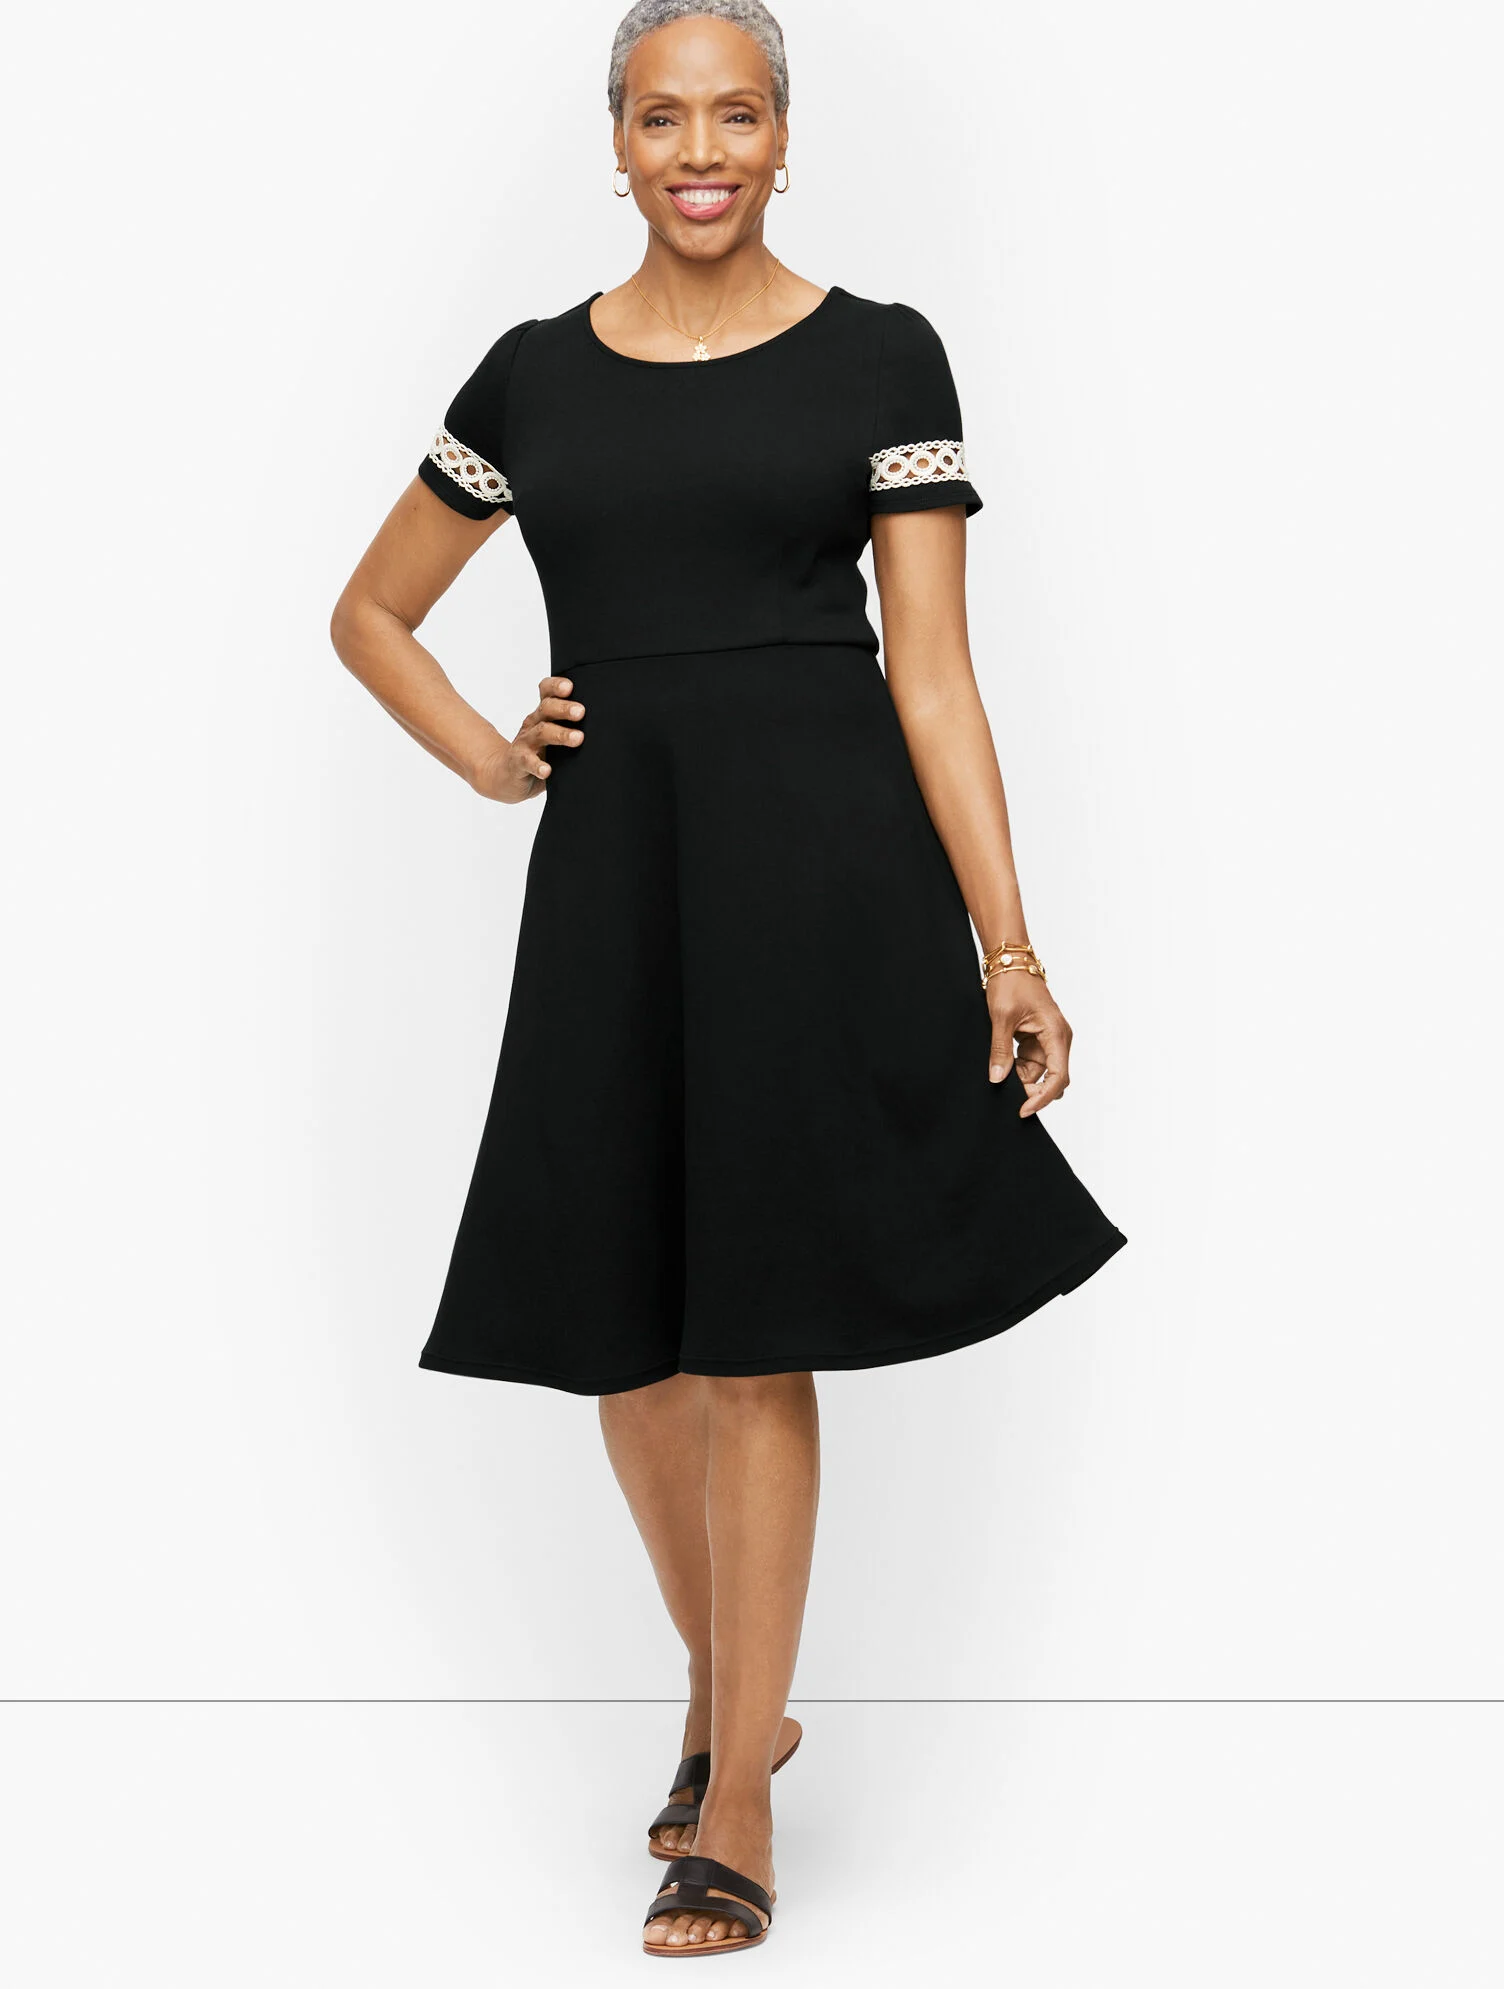 What to wear to a graduation ceremony as mom? LBD as a failproof graduation outfit idea.